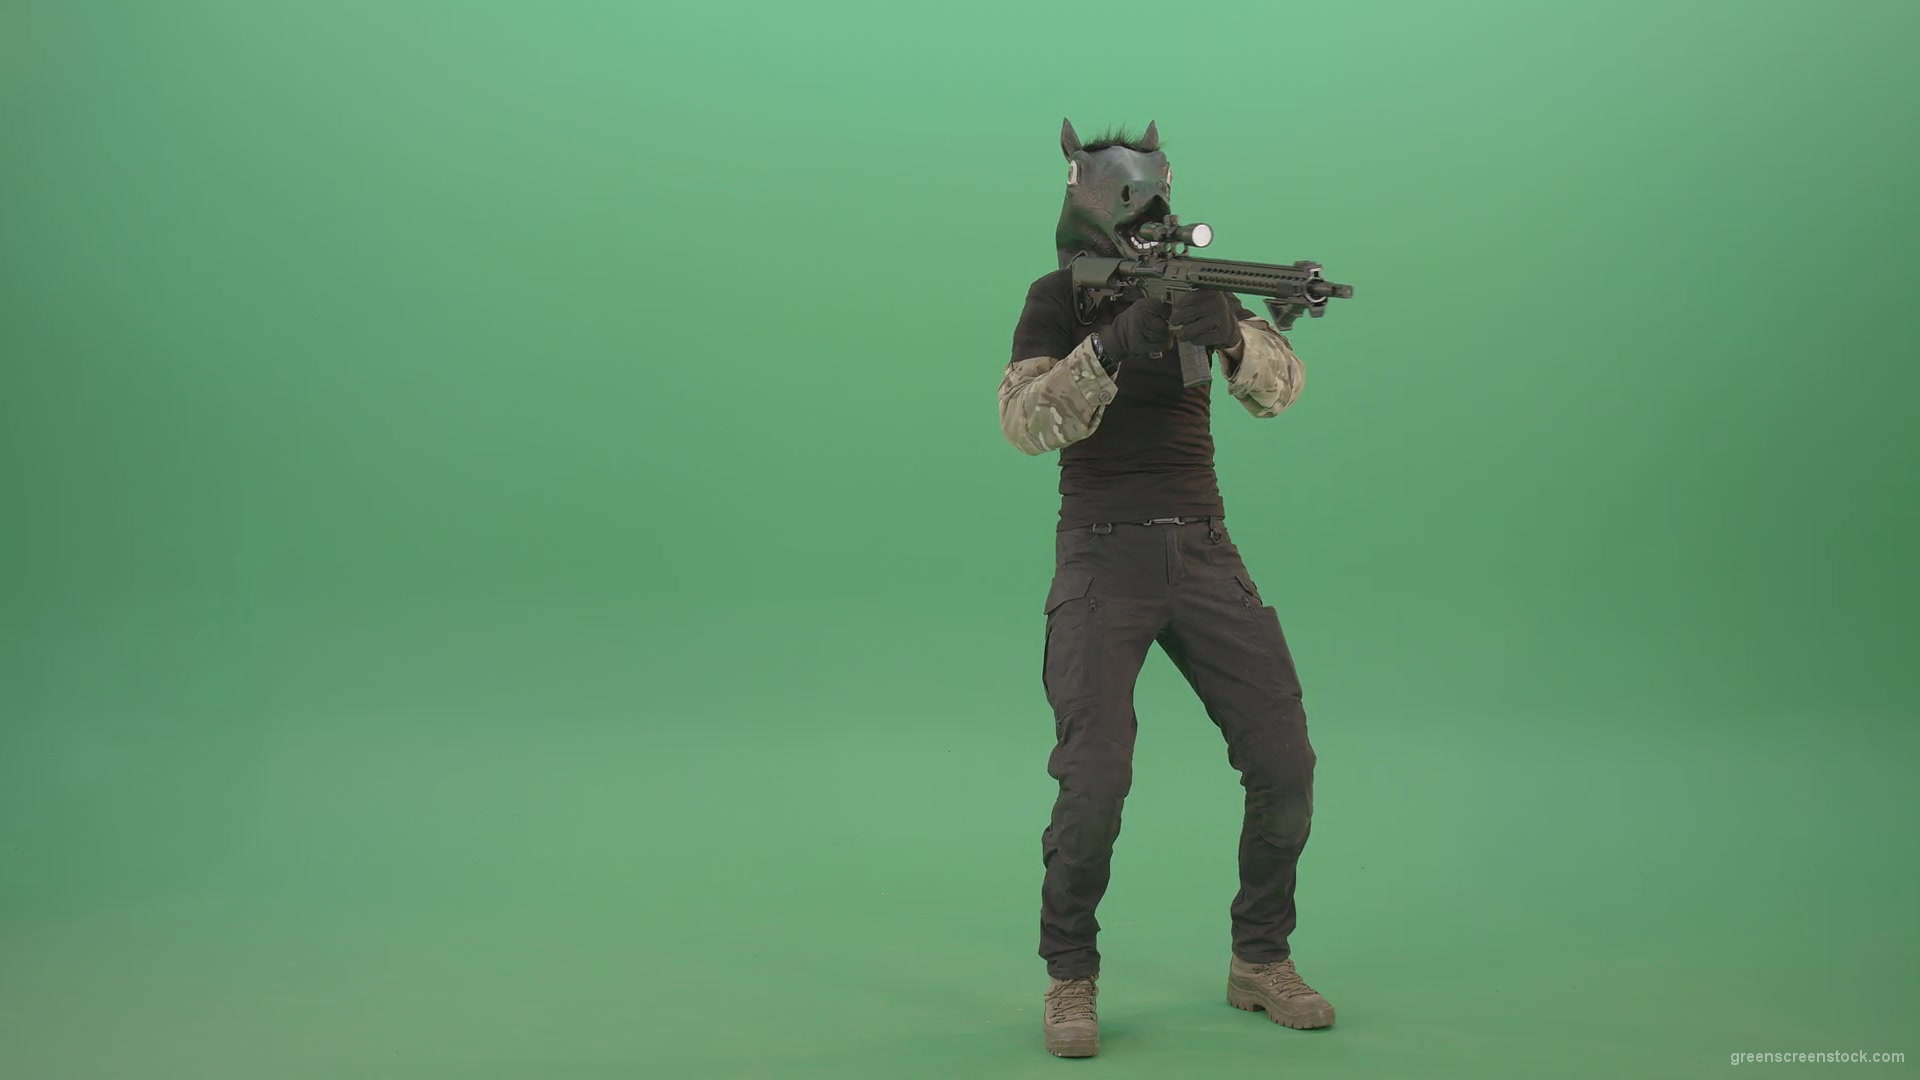 Front-view-Army-Man-in-horse-mask-shooting-from-Machine-Gun-isolated-on-Chromakey-Green-Screen-4K-Video-Footage-1920_005 Green Screen Stock